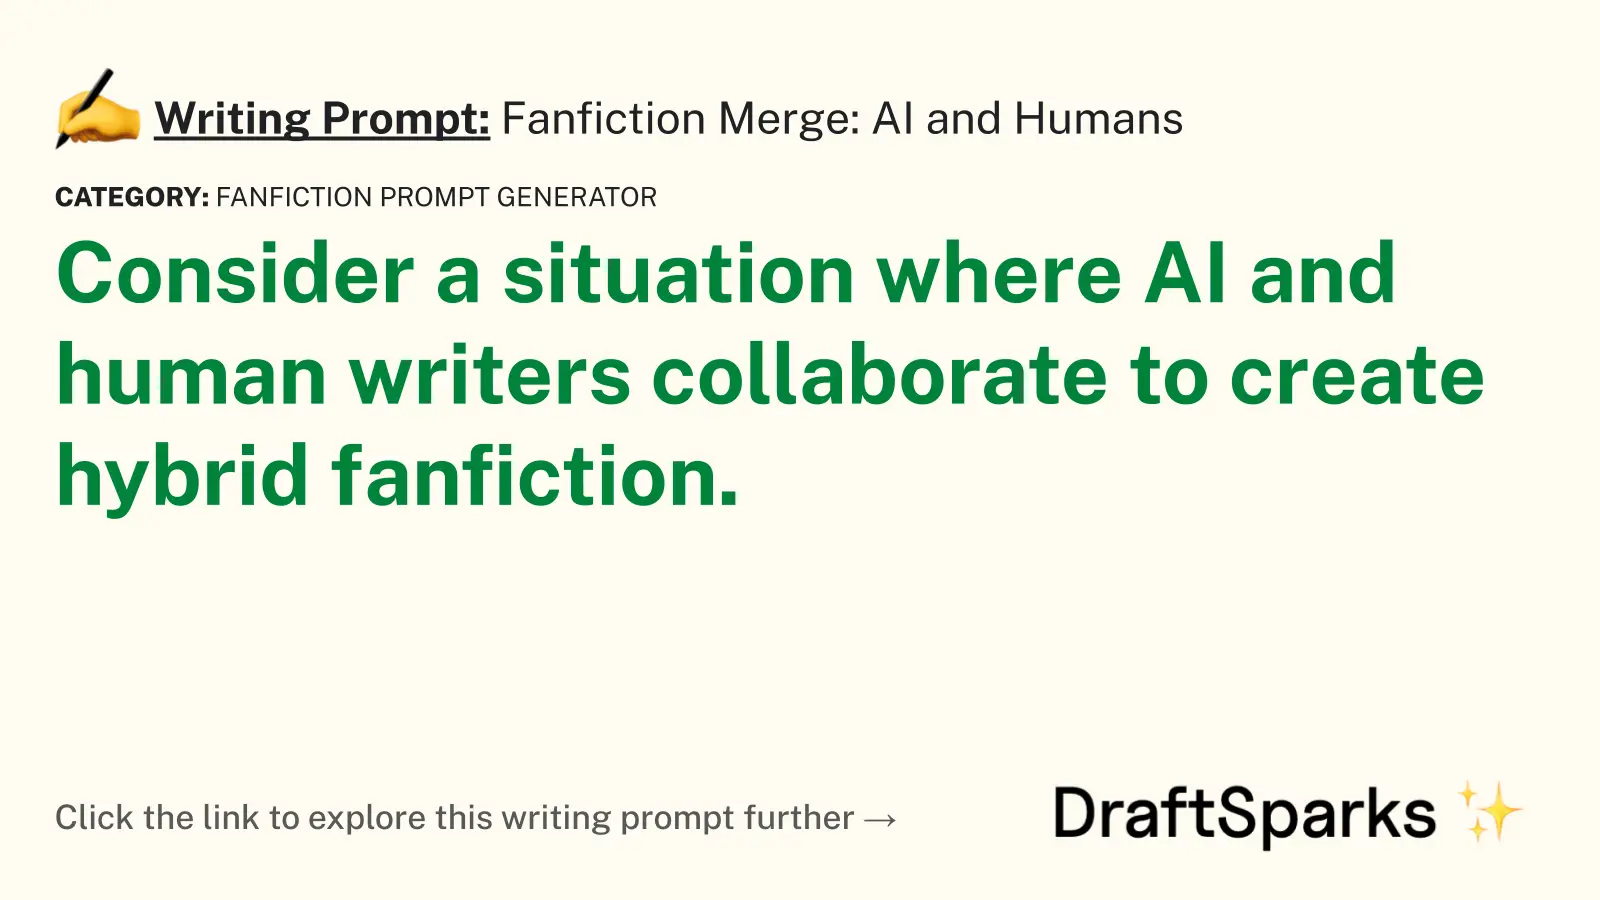 Fanfiction Merge: AI and Humans